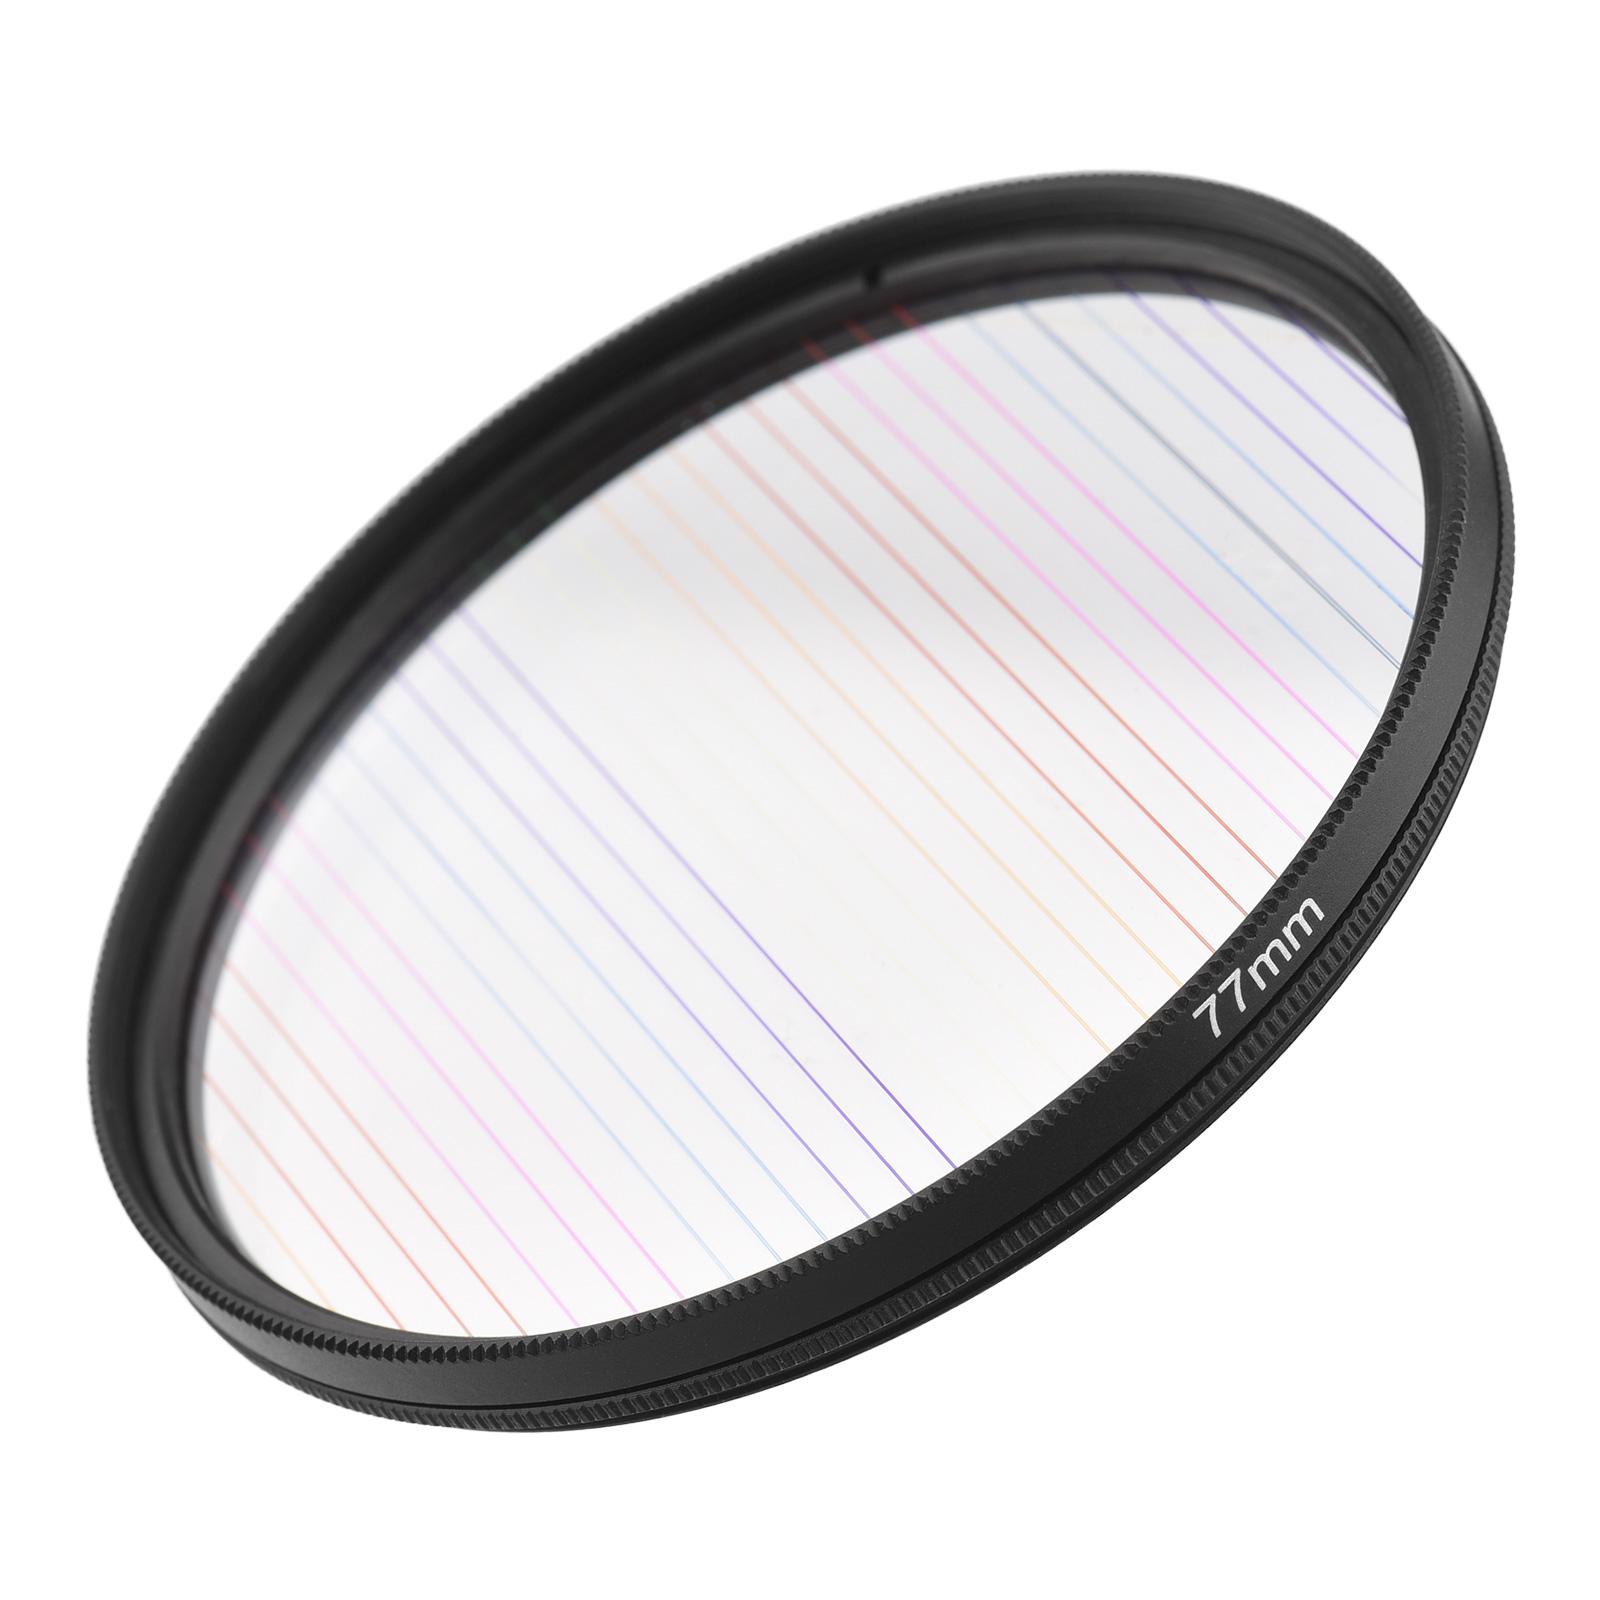 TOMTOP JMS 77mm Rainbow Streak Lens Filter Special Effects Anamorphic Optical Glass Filter for DSLR Cameras